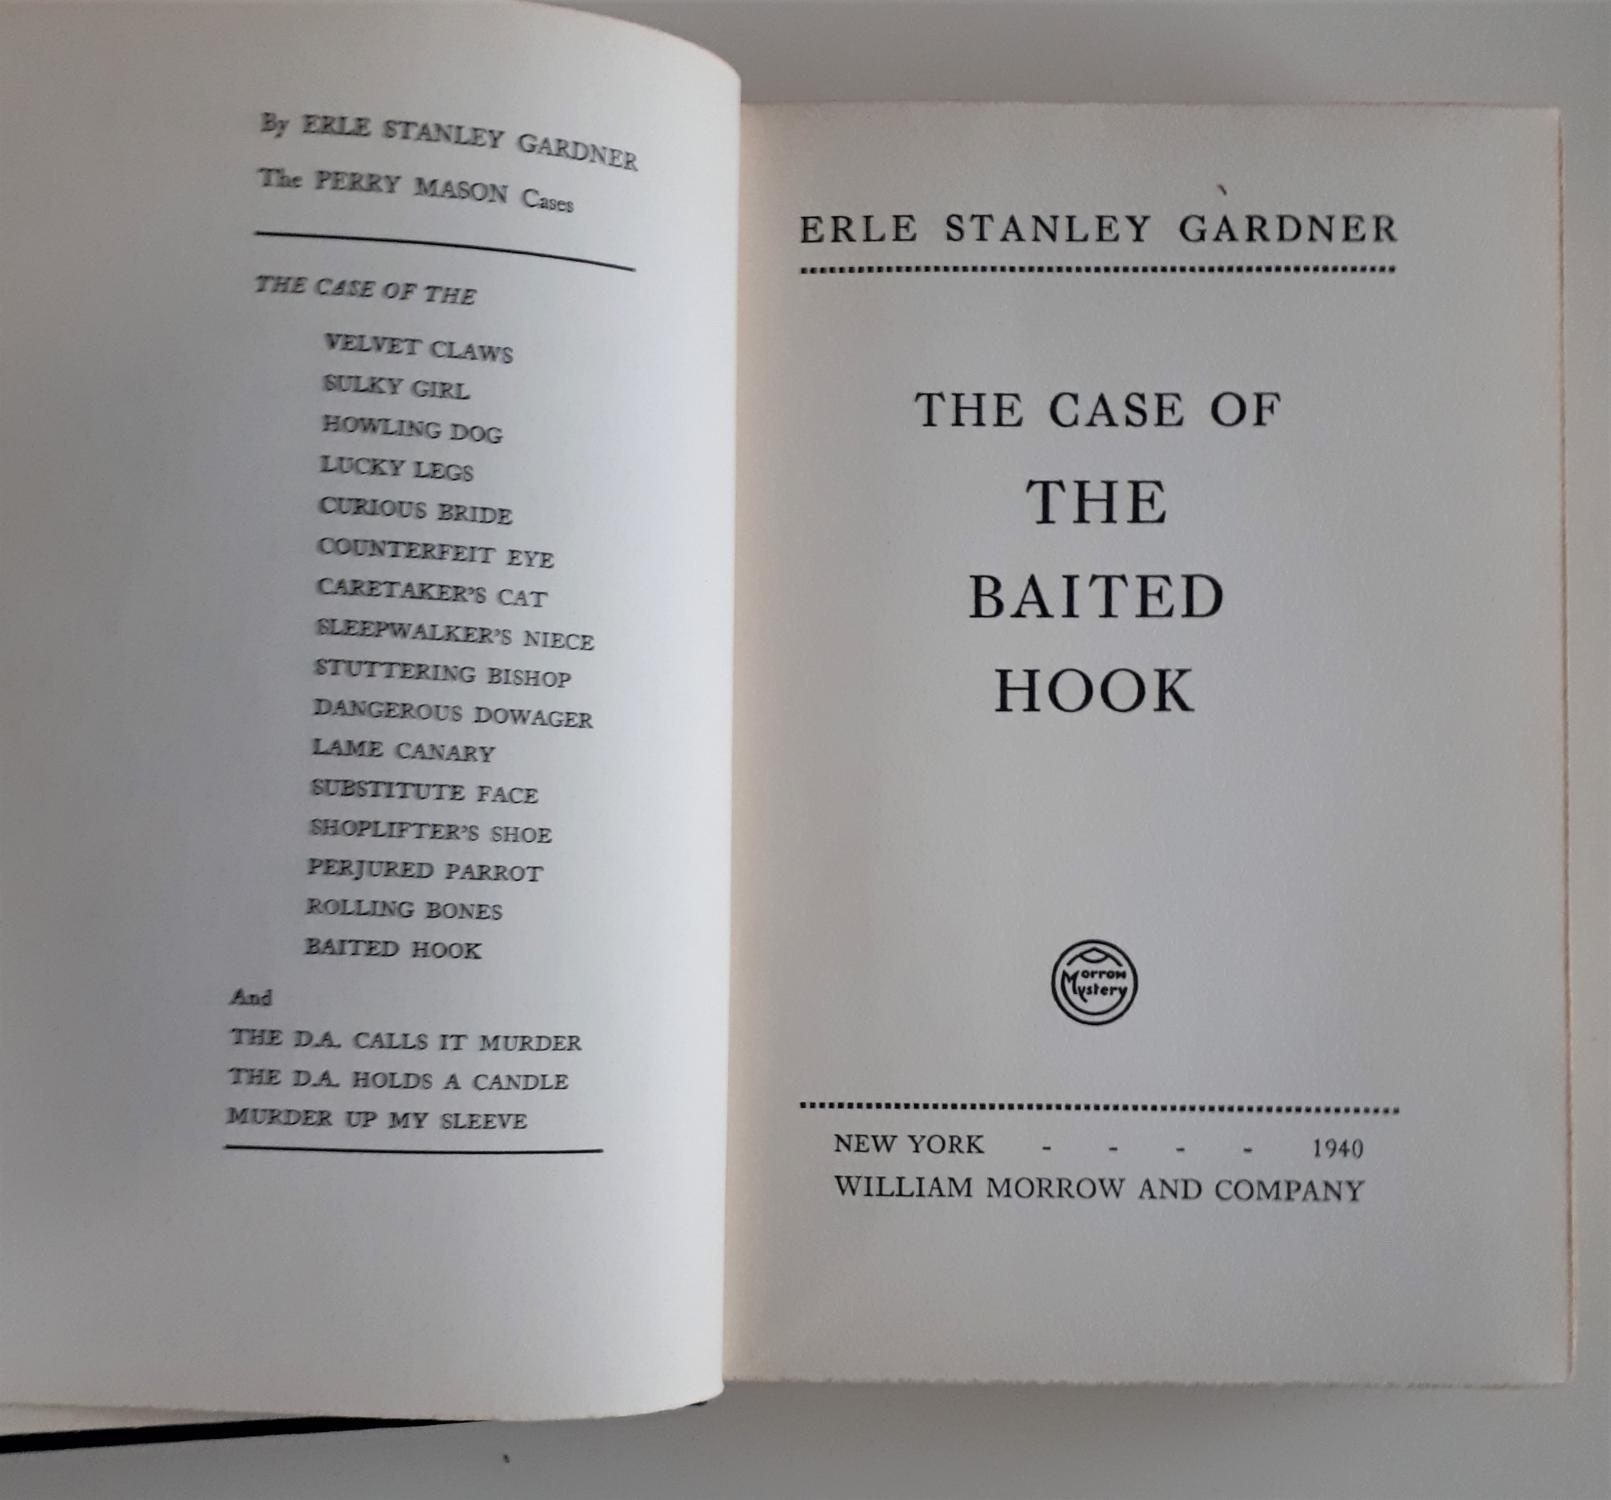 The case of the baited hook by Erle Stanley Gardner: Very Good